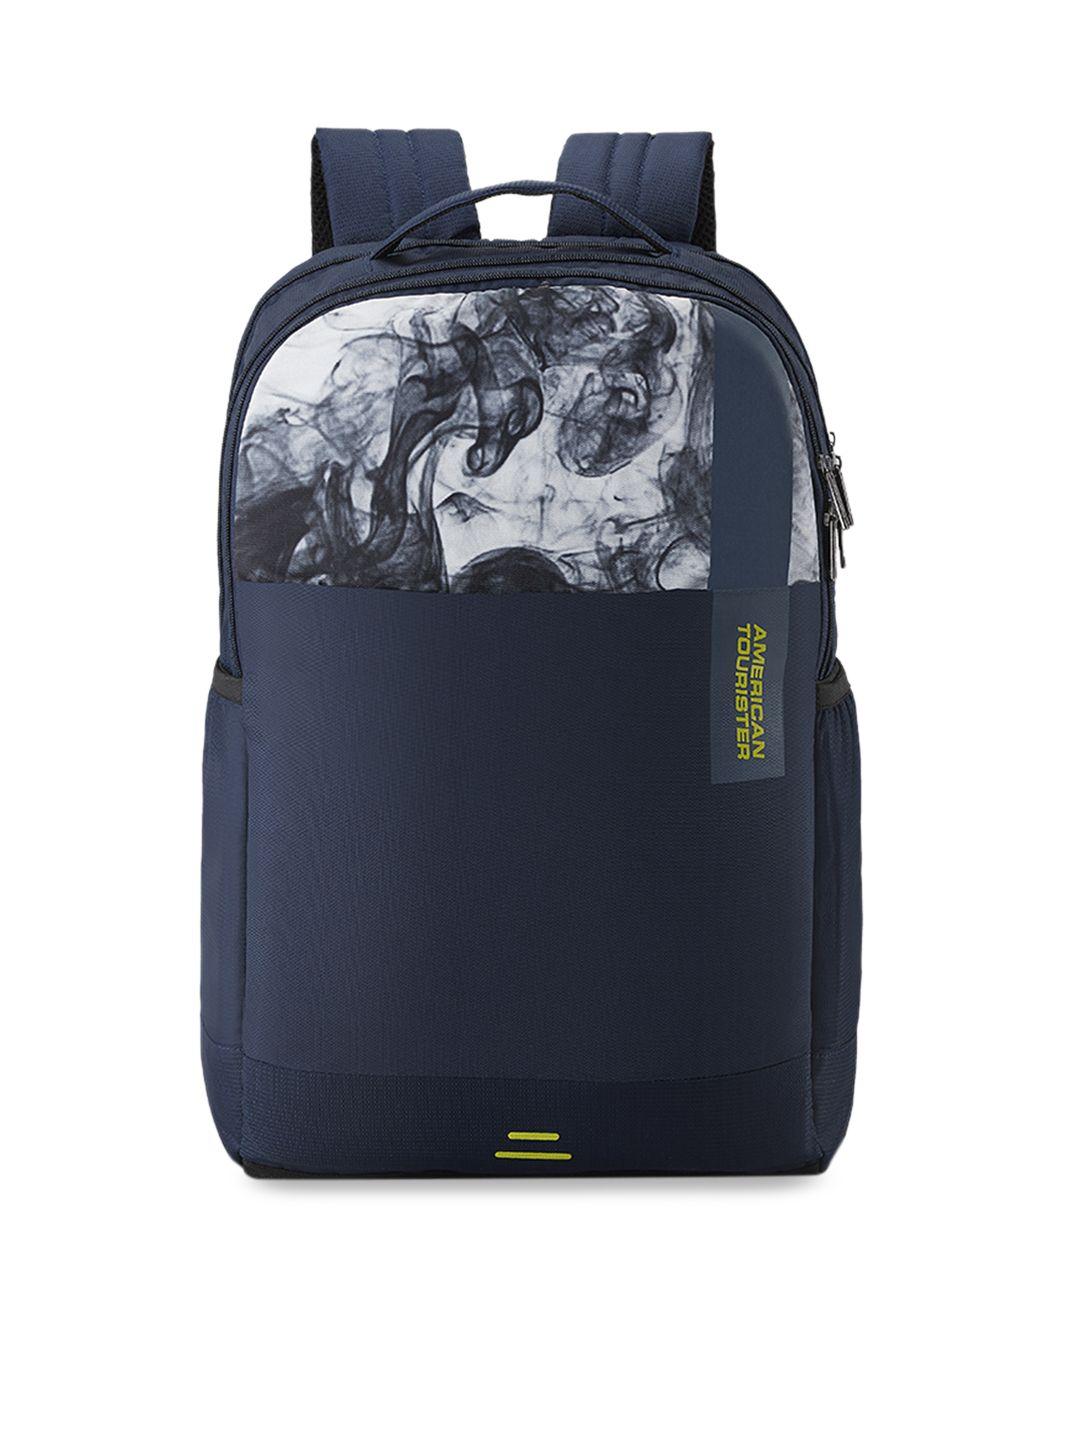 american-tourister-unisex-navy-blue-backpack